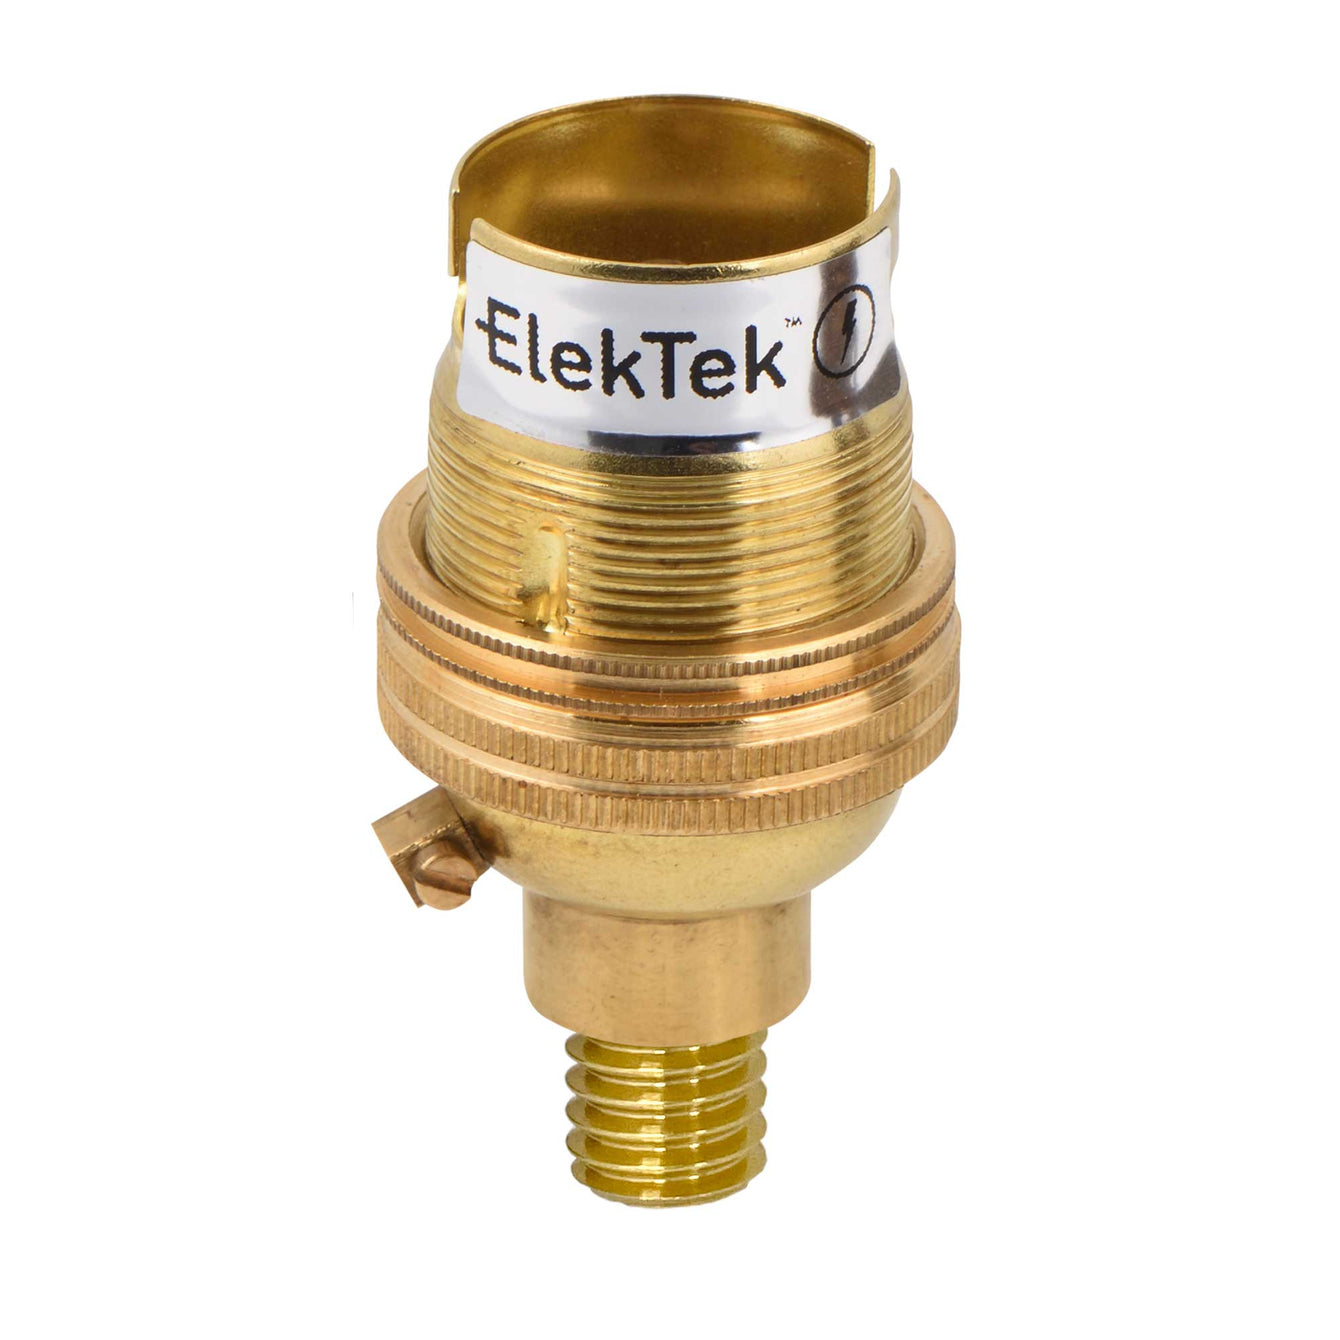 ElekTek Lamp Holder Half Inch Bayonet Cap B22 Unswitched With Shade Ring Wood Mount Antique Brass